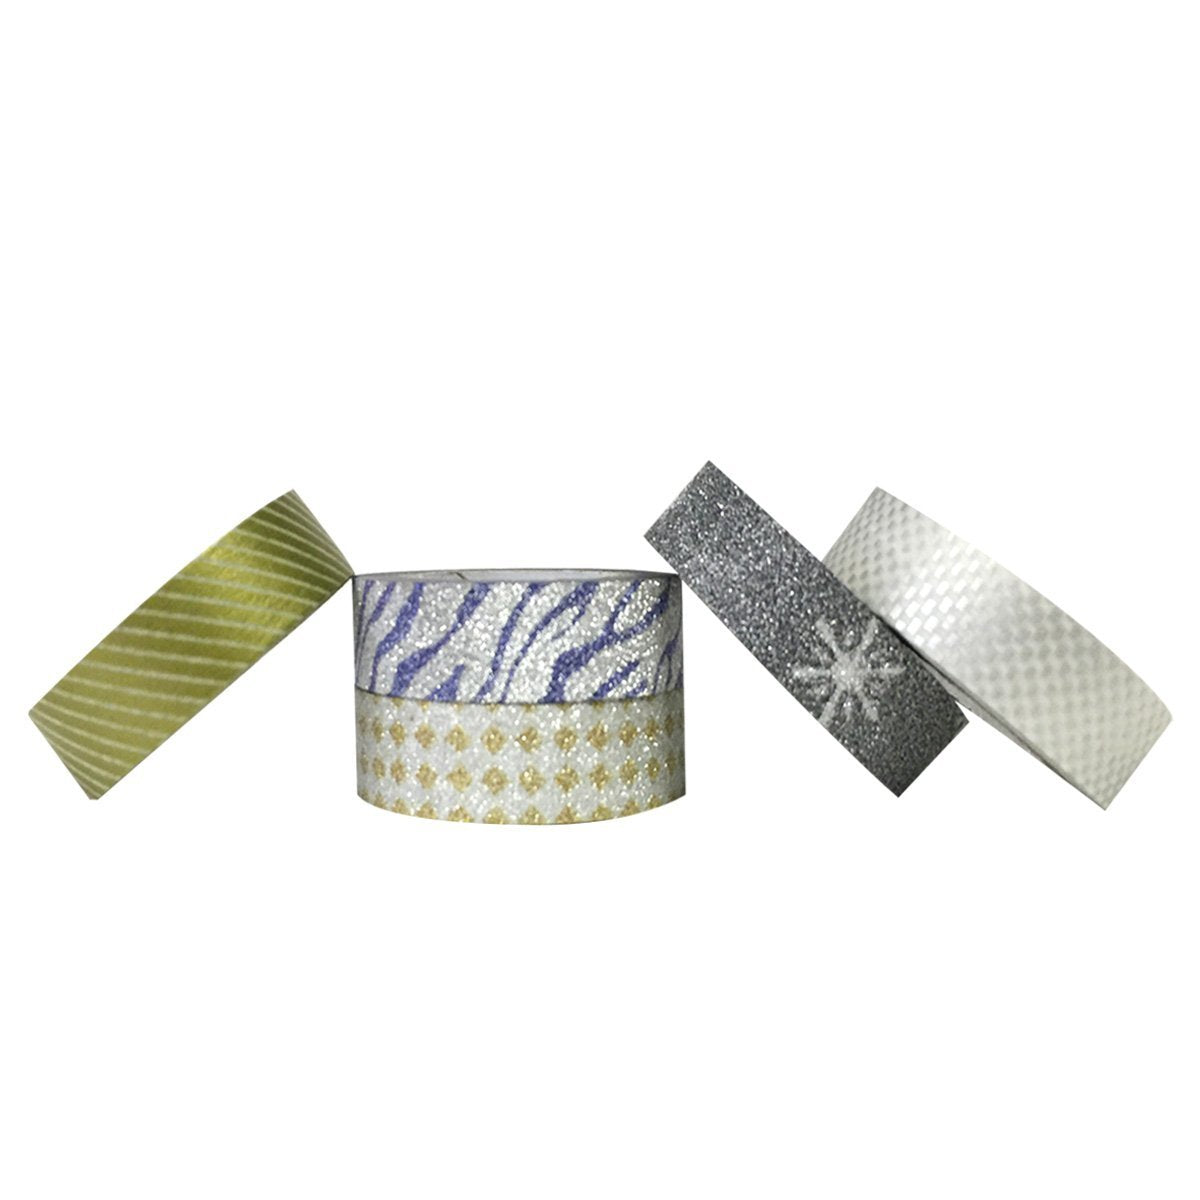 Wrapables Silver and Gold Washi Tapes Masking Tapes, Set of 5